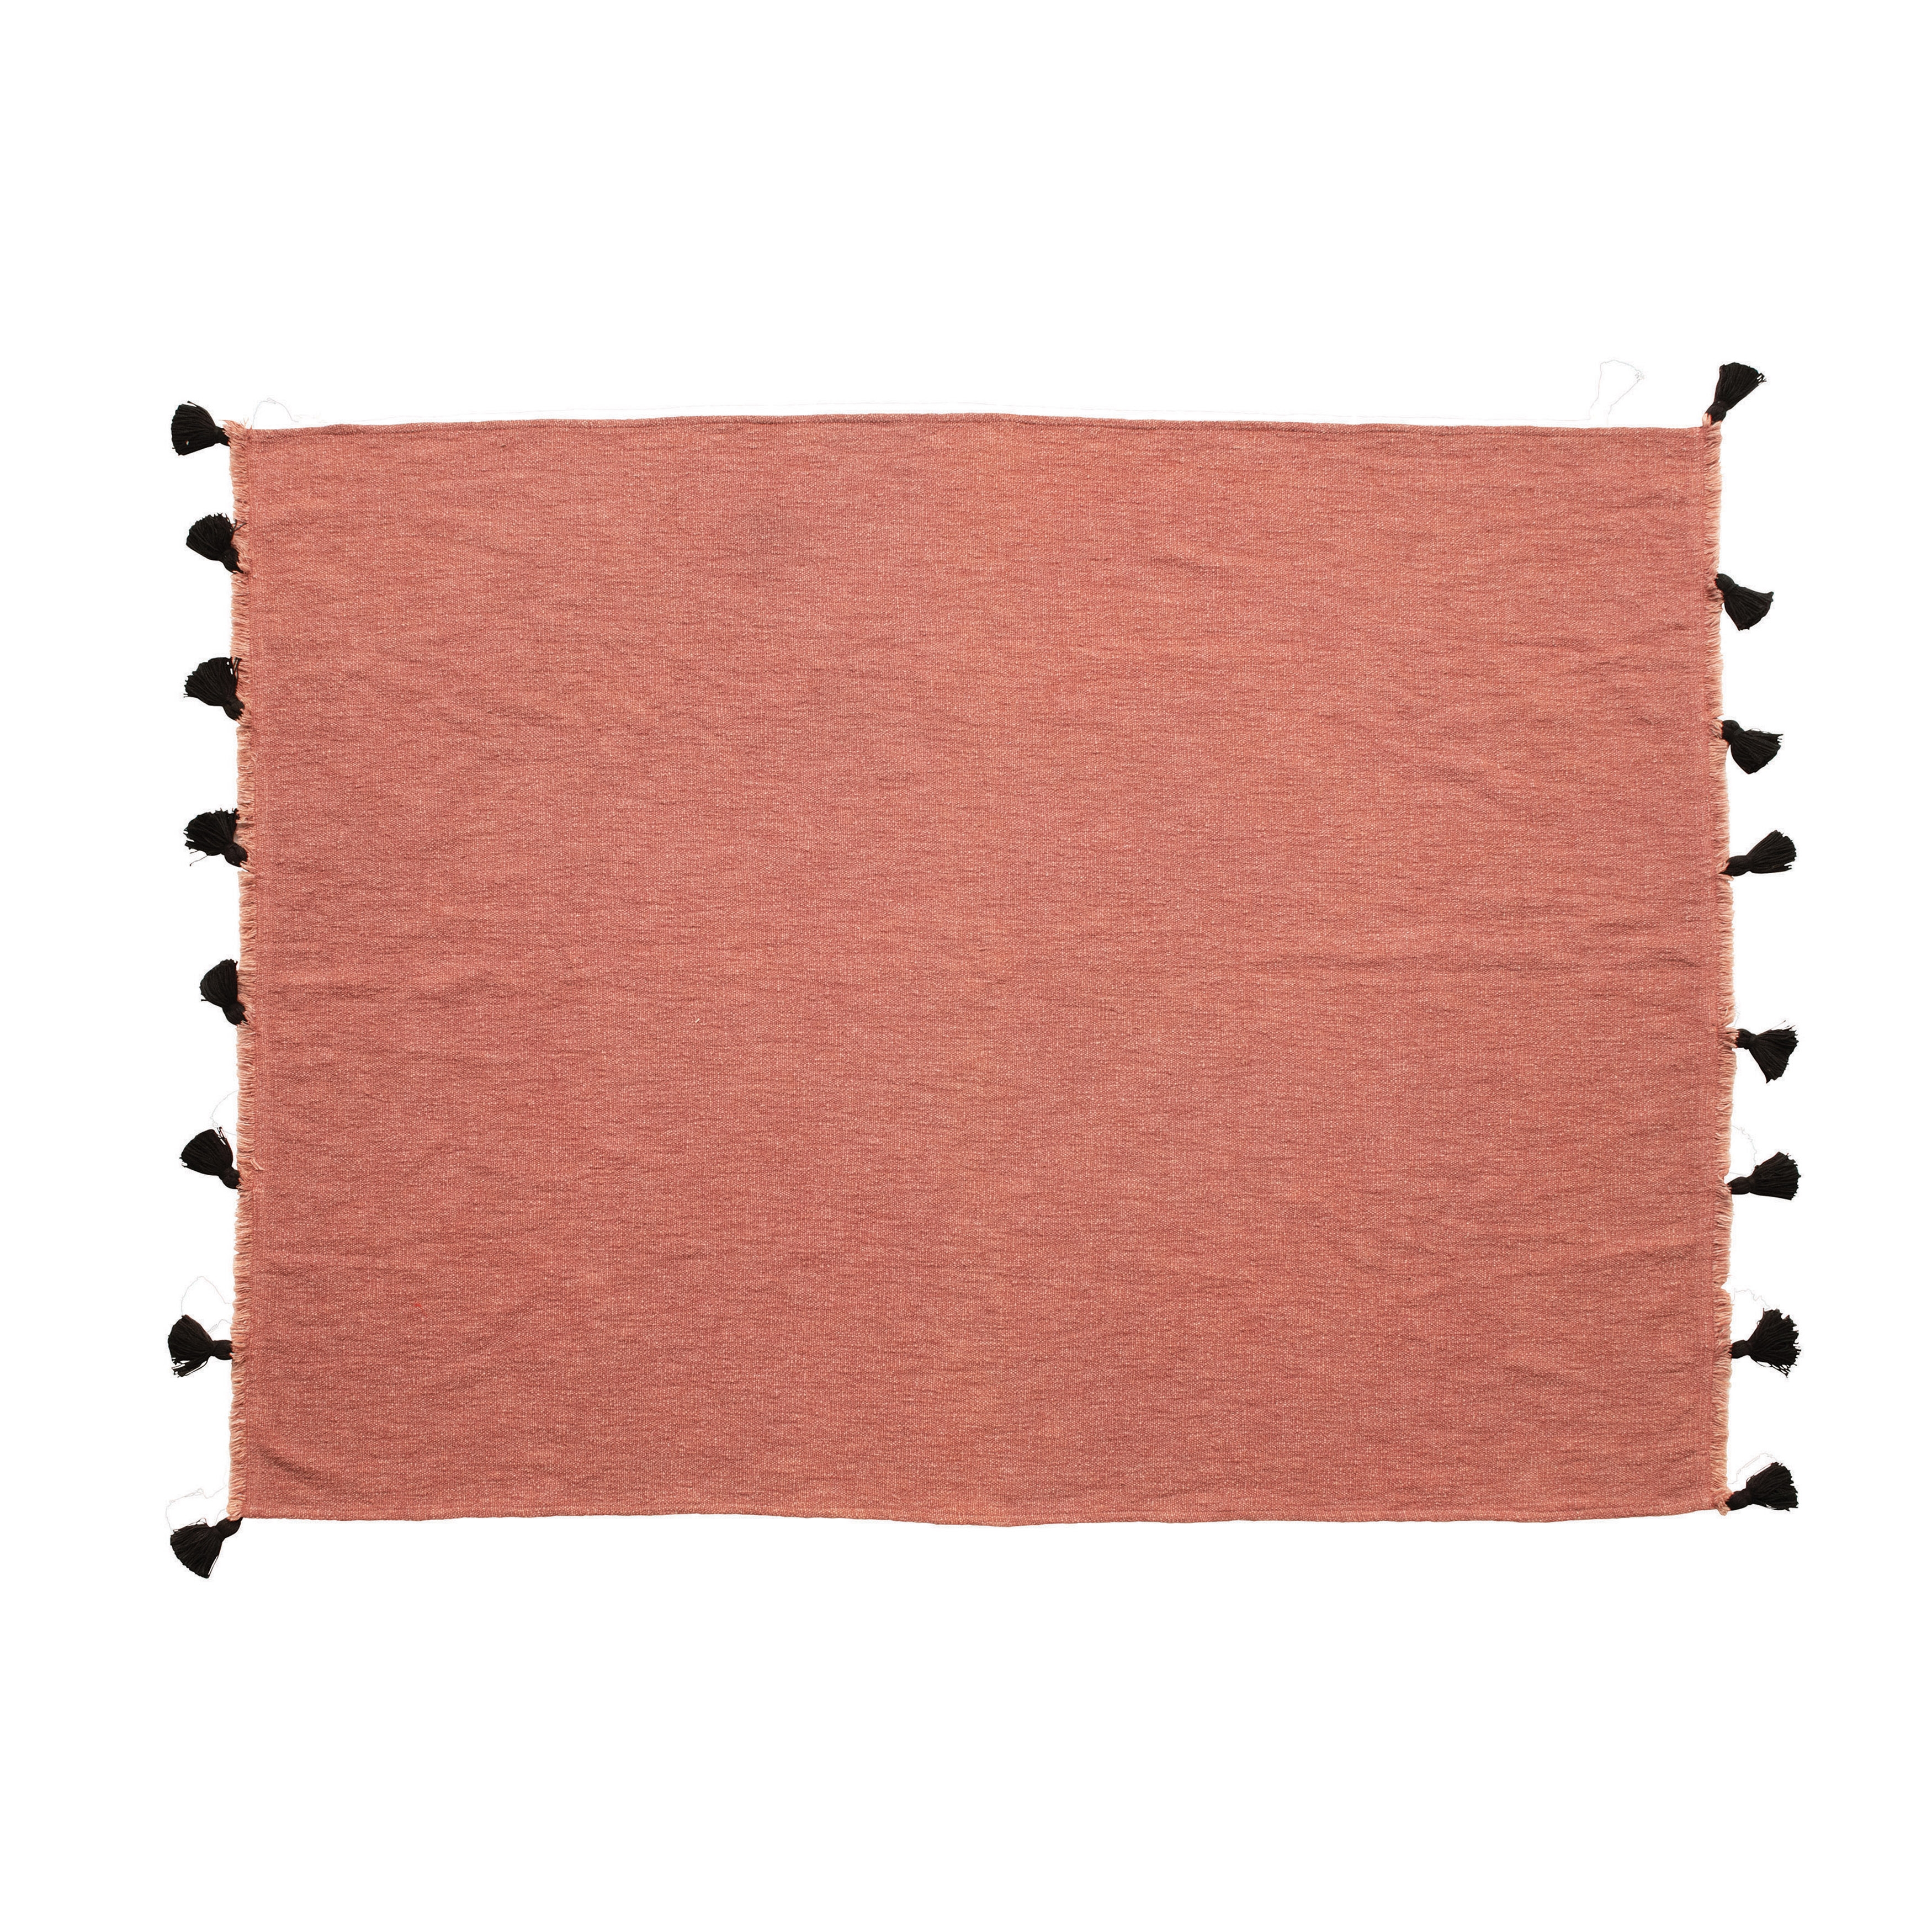 Cotton Blend Throw with Tassels, Rose Color & Black - Image 0